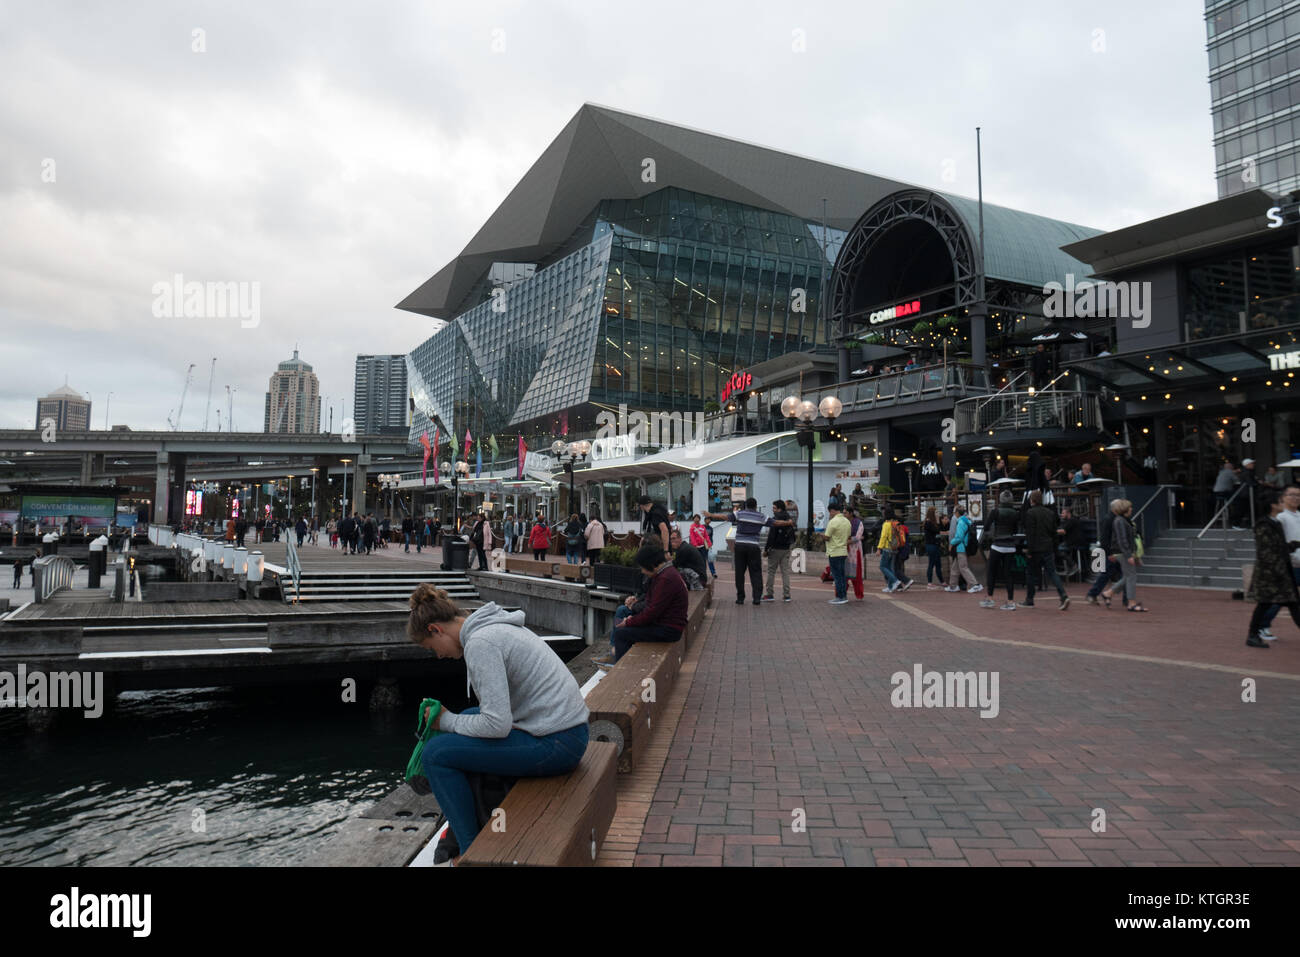 harbourside shopping mall in sydney darling harbour Stock Photo